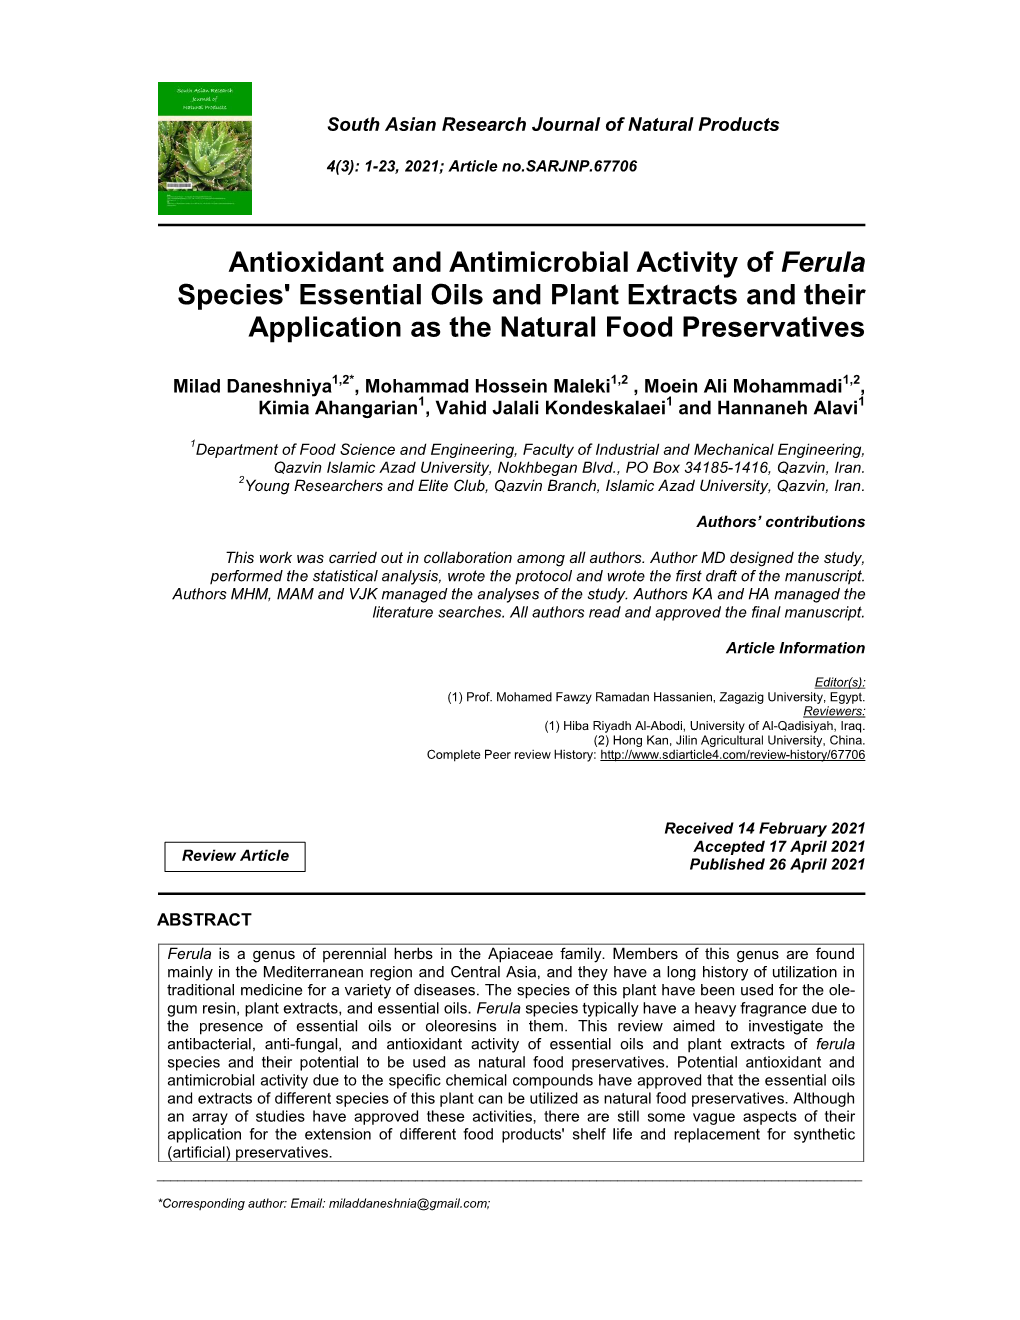 Antioxidant and Antimicrobial Activity of Ferula Species' Essential Oils and Plant Extracts and Their Application As the Natural Food Preservatives